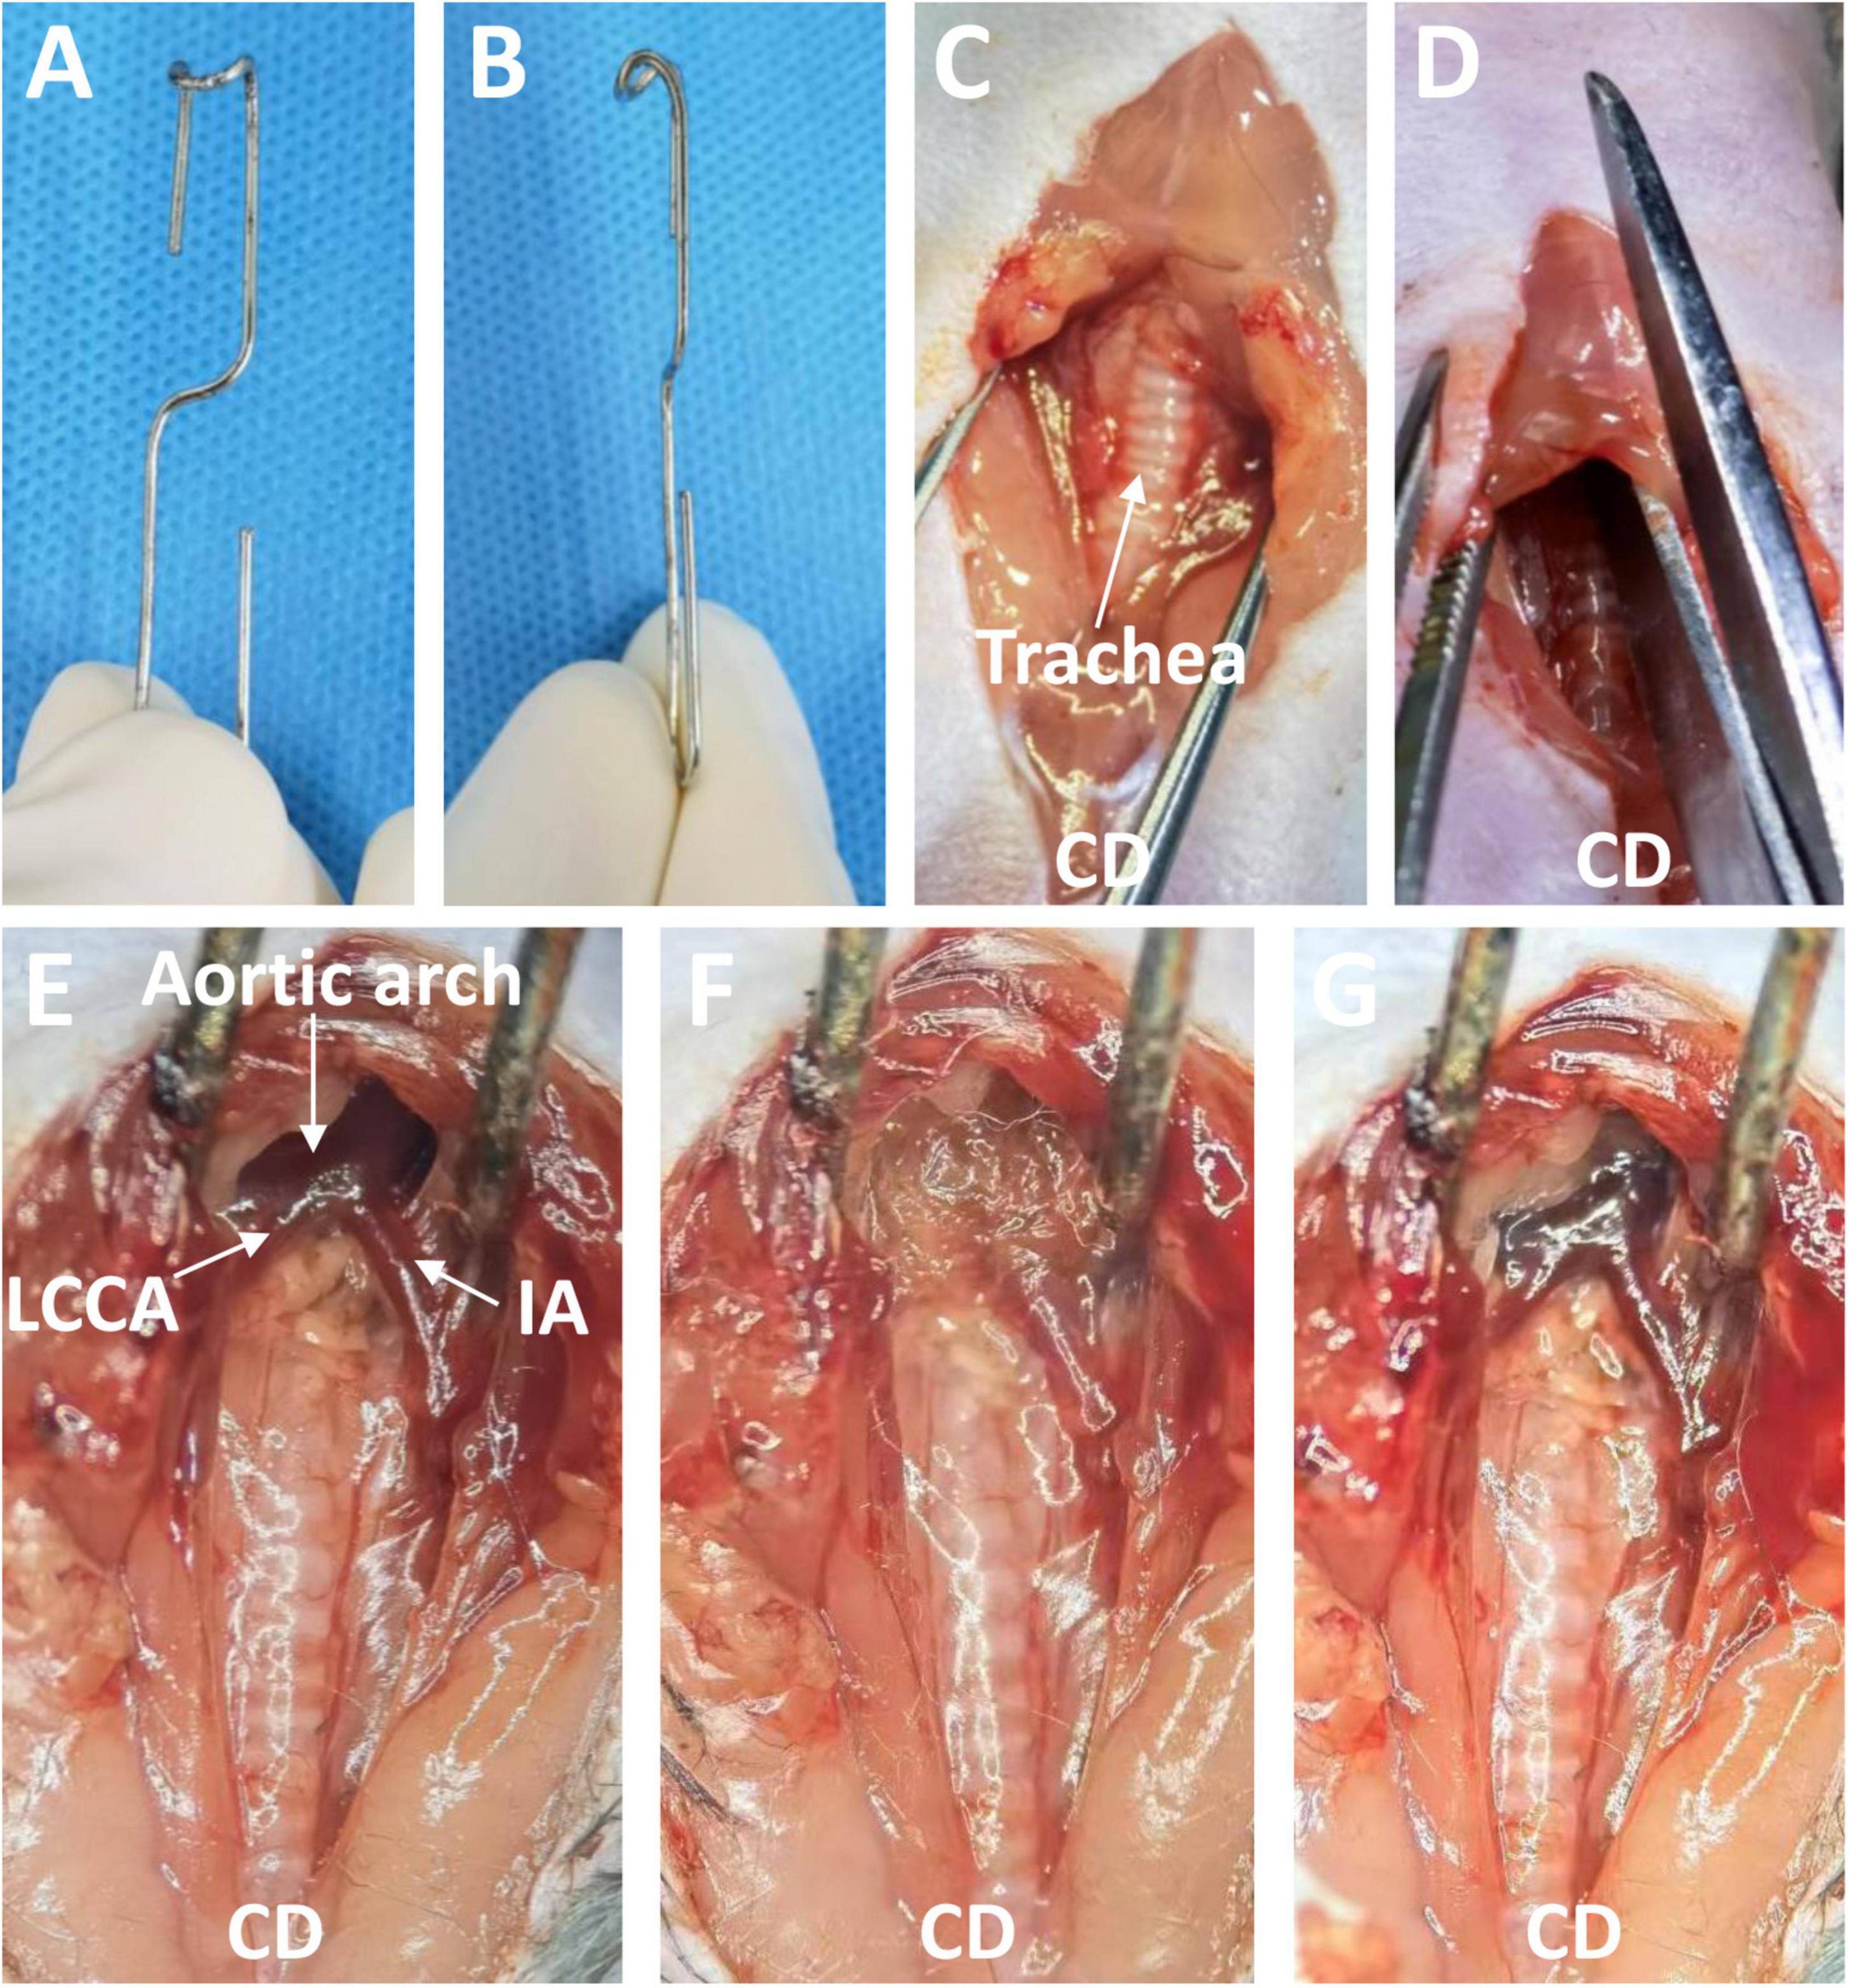 Murine model of elastase-induced proximal thoracic aortic aneurysm through a midline incision in the anterior neck